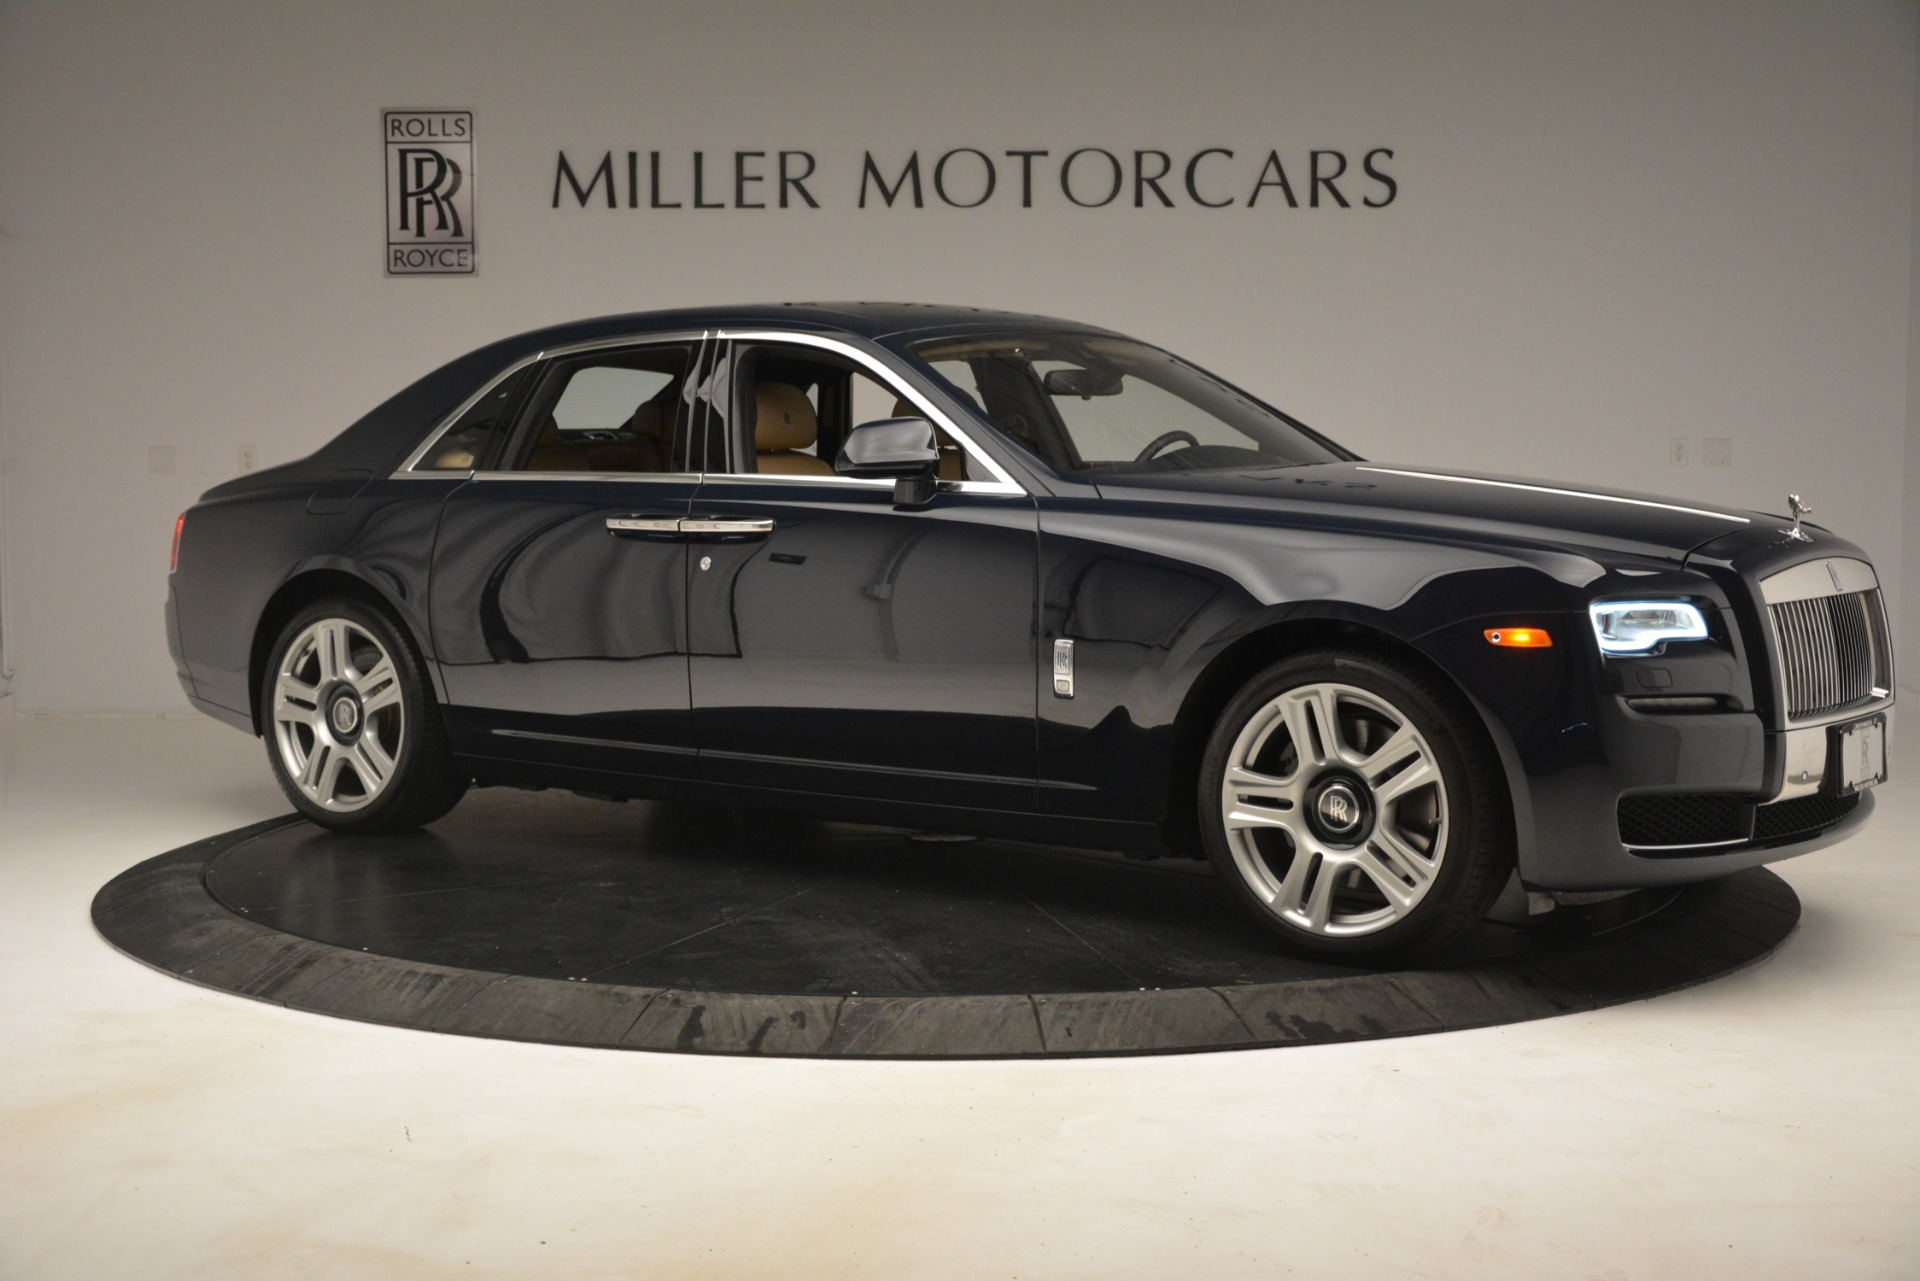 PreOwned 2015 RollsRoyce Ghost For Sale () Miller Motorcars Stock 7445A